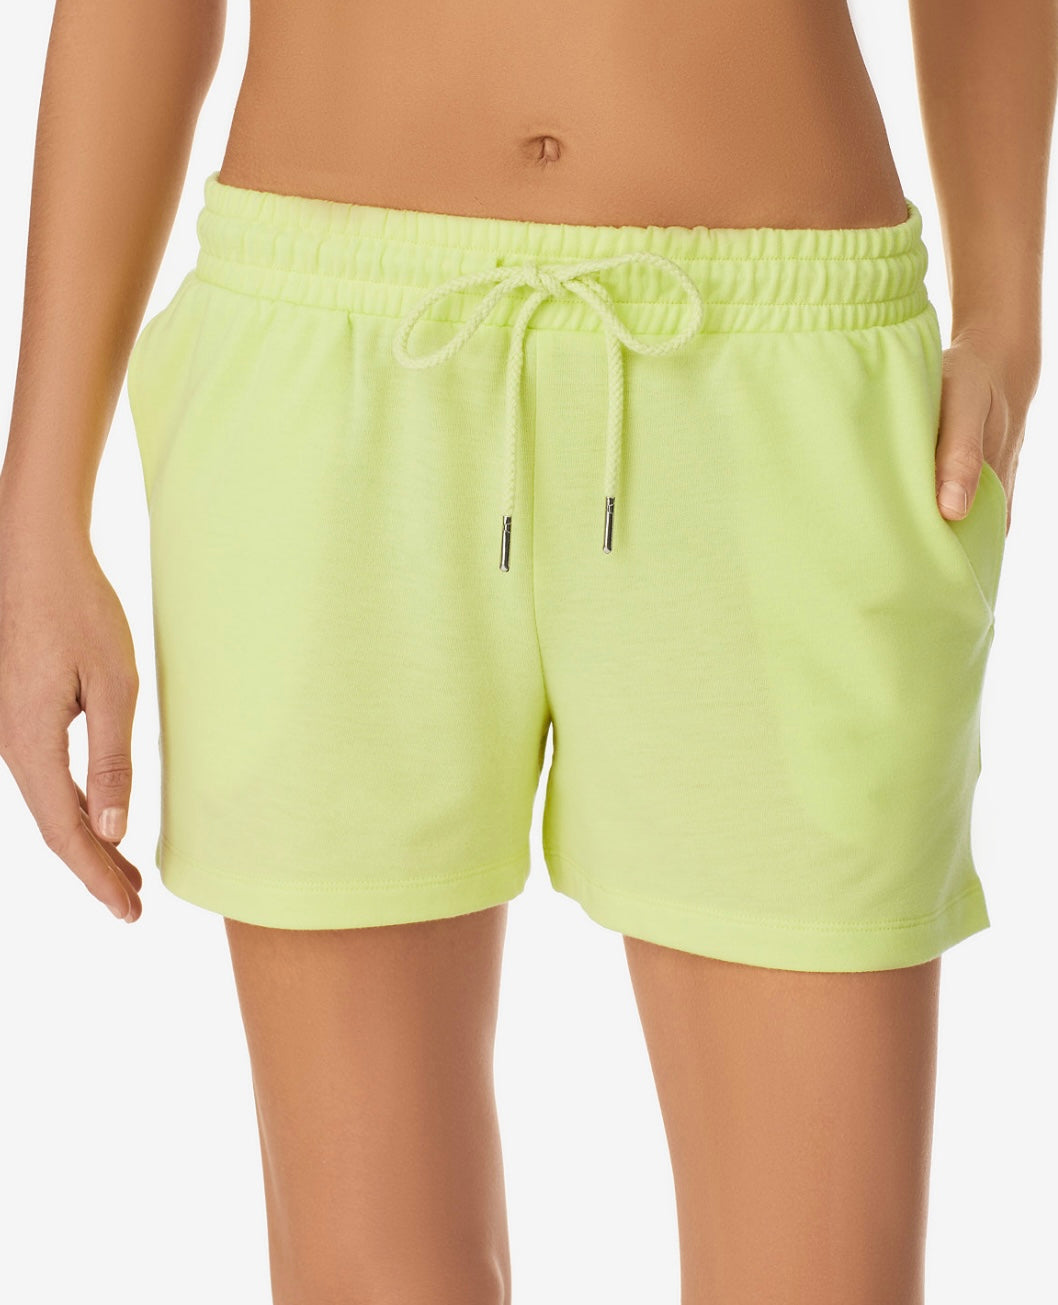 Refinery29 Women's Super Soft French Terry Lounge Shorts Yellow Size XS